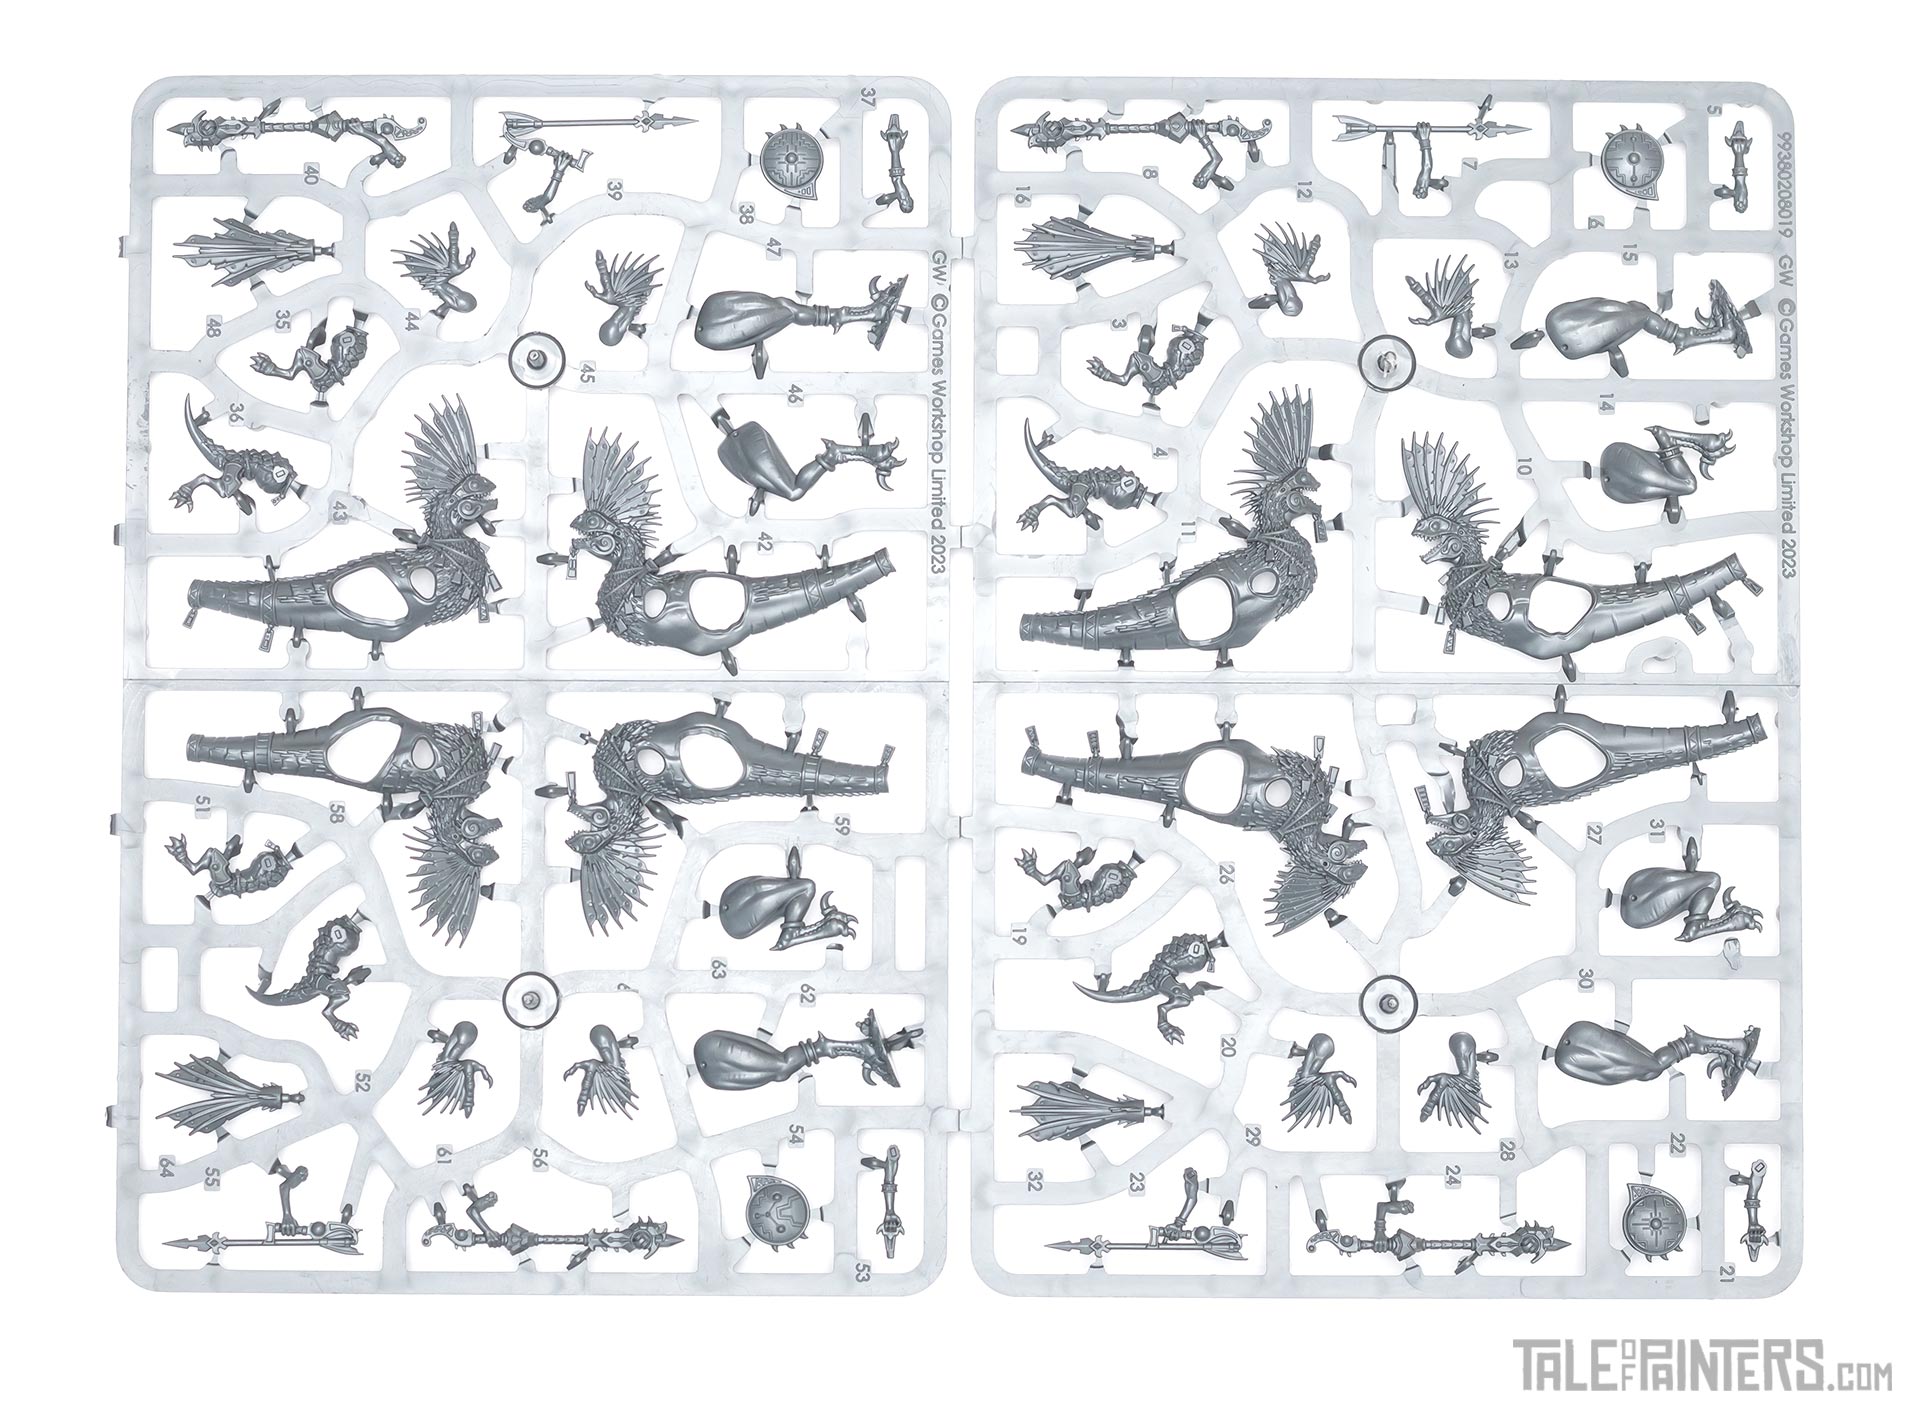 Raptadon cavalry sprues 1 and 2 from the Seraphon army set